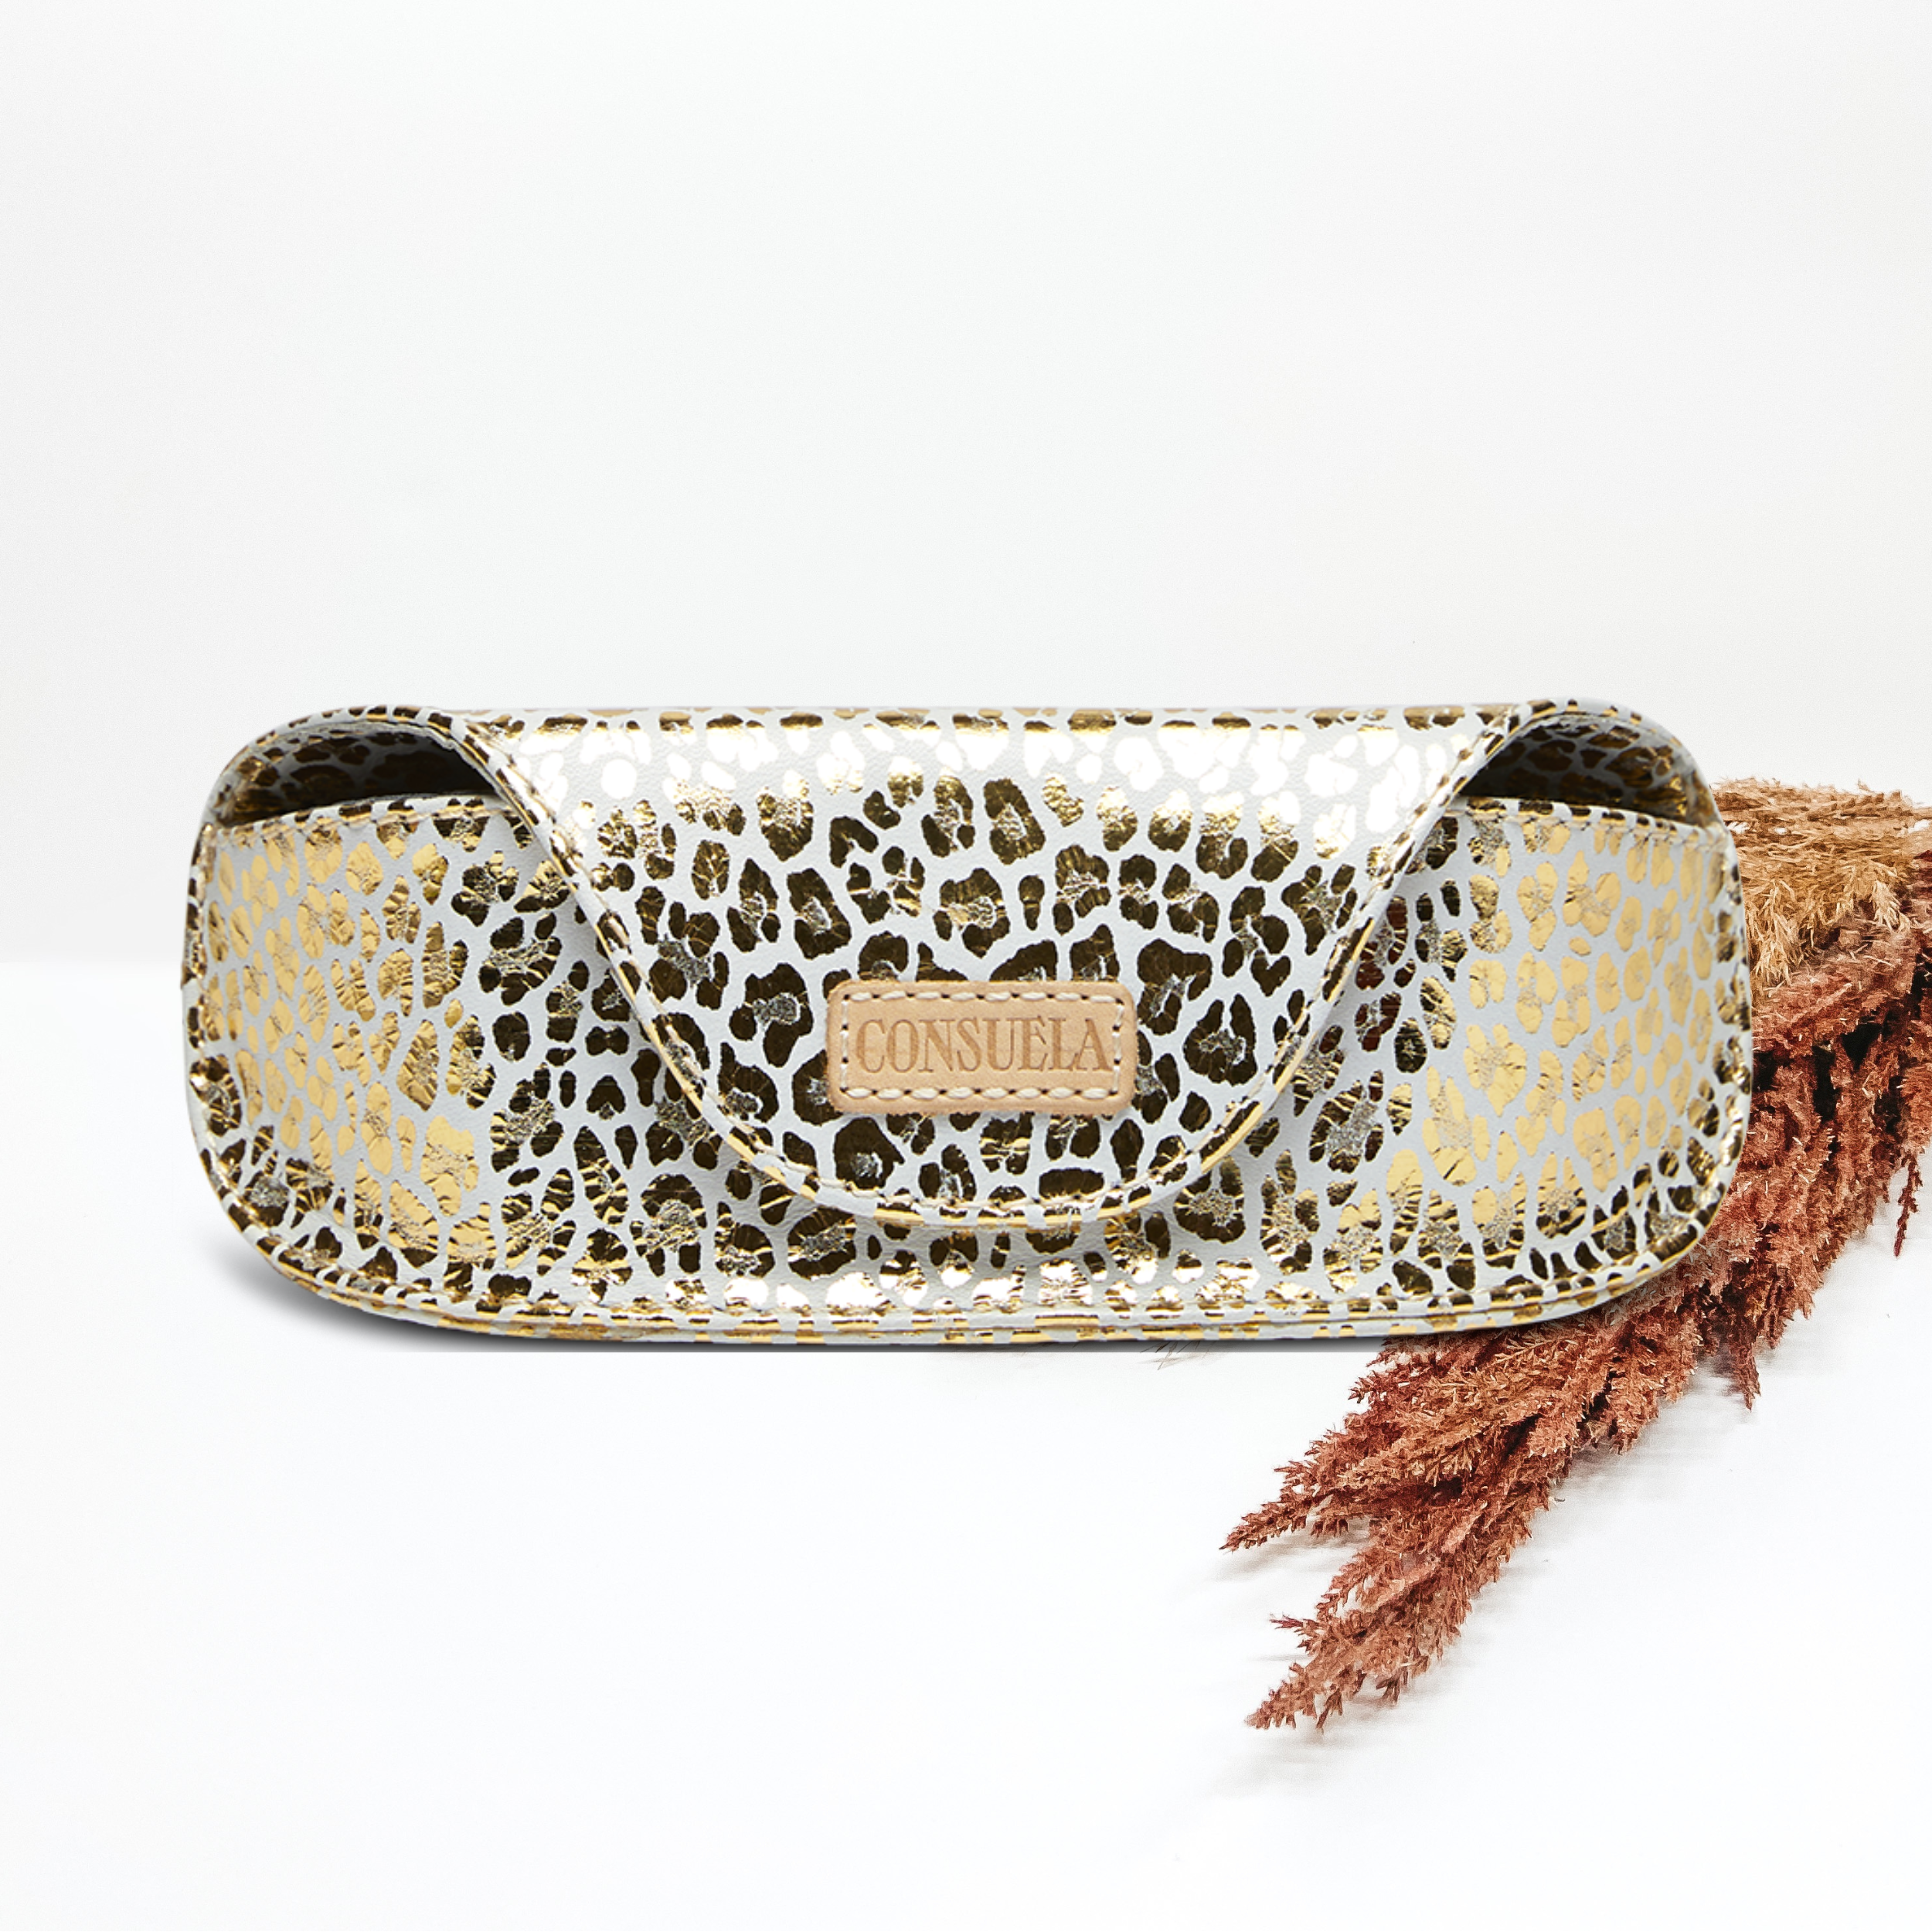 Pictured on a white background is a sunglasses case with a light tan leather patch that says "CONSUELA". This case is white with a metallic gold leopard print design. 